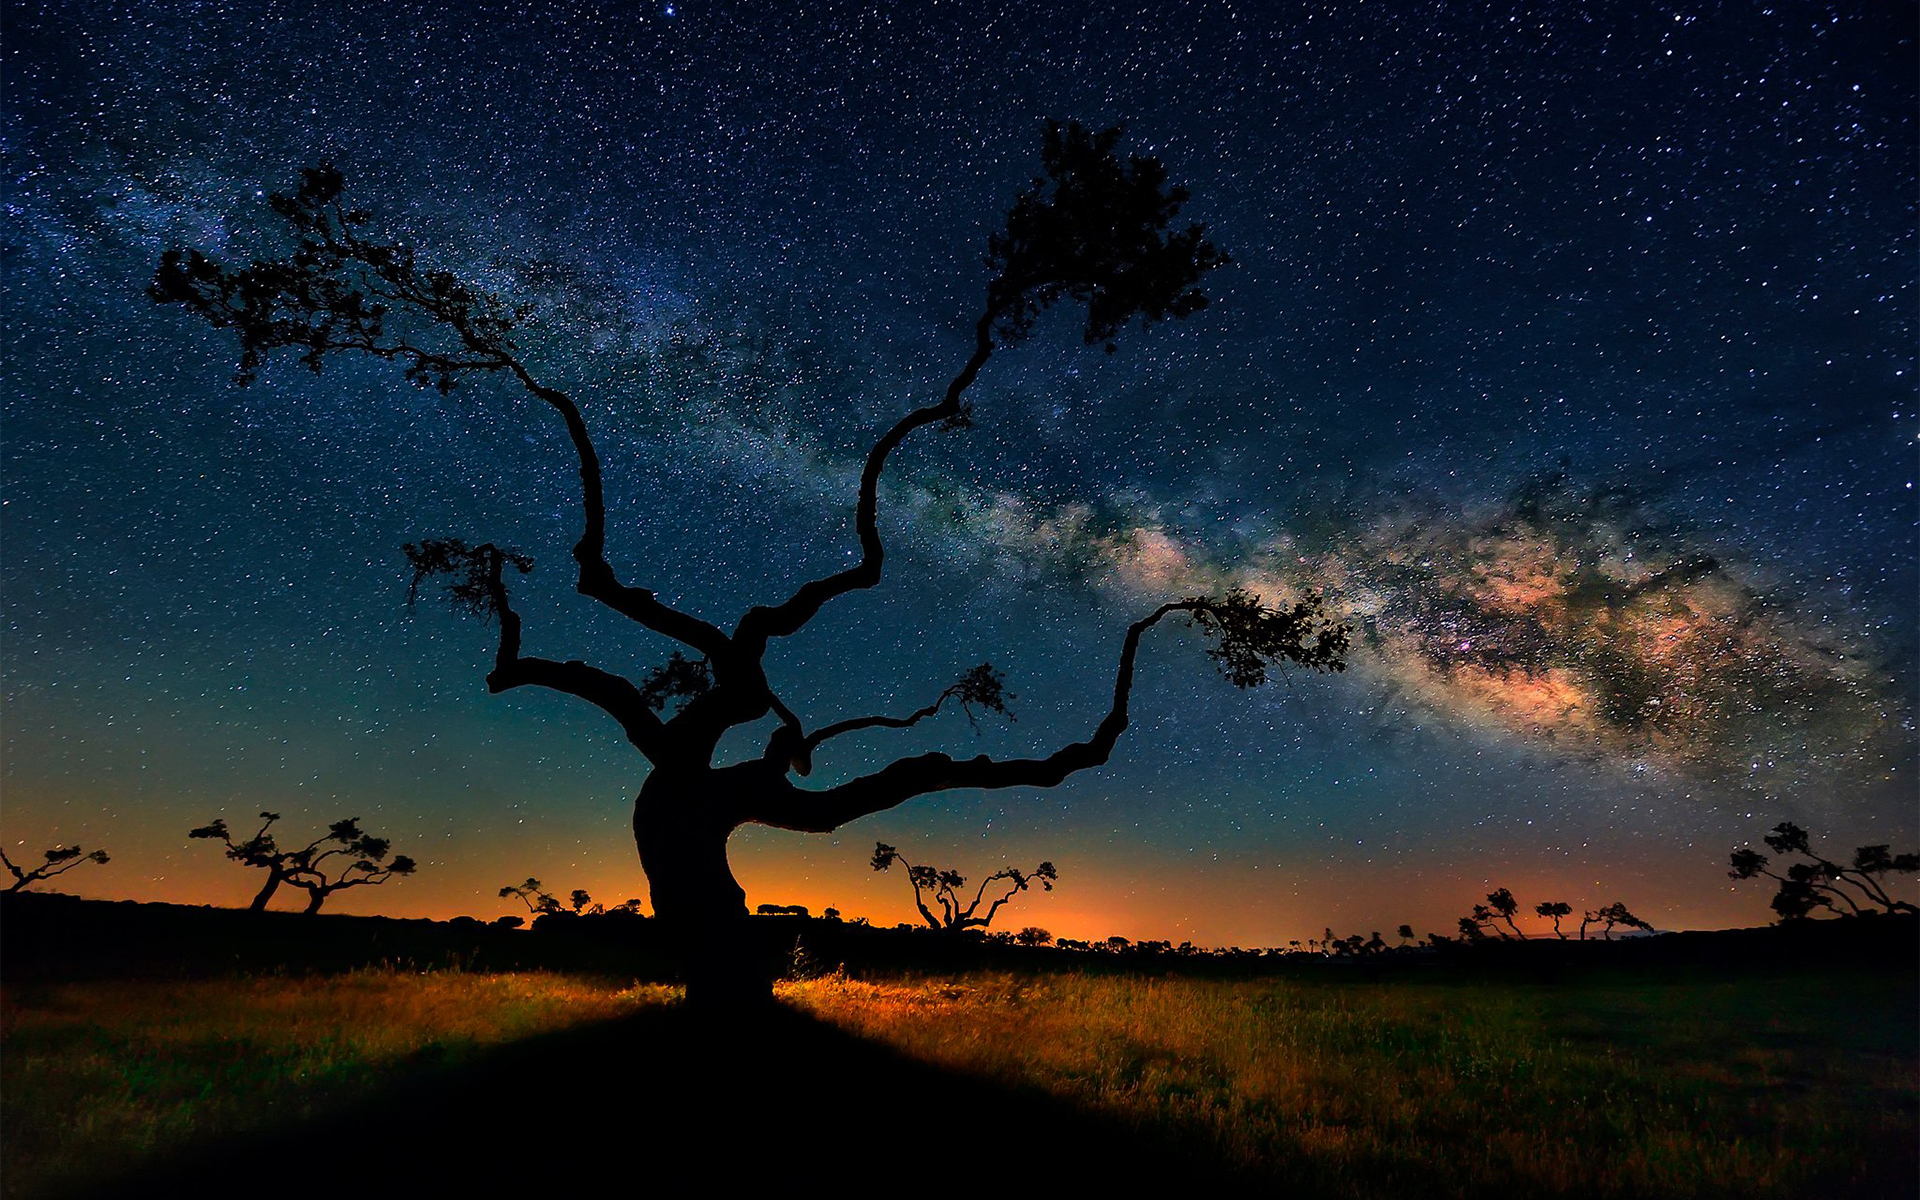 10 mesmerizing HD images of the Milky Way | HD Wallpapers